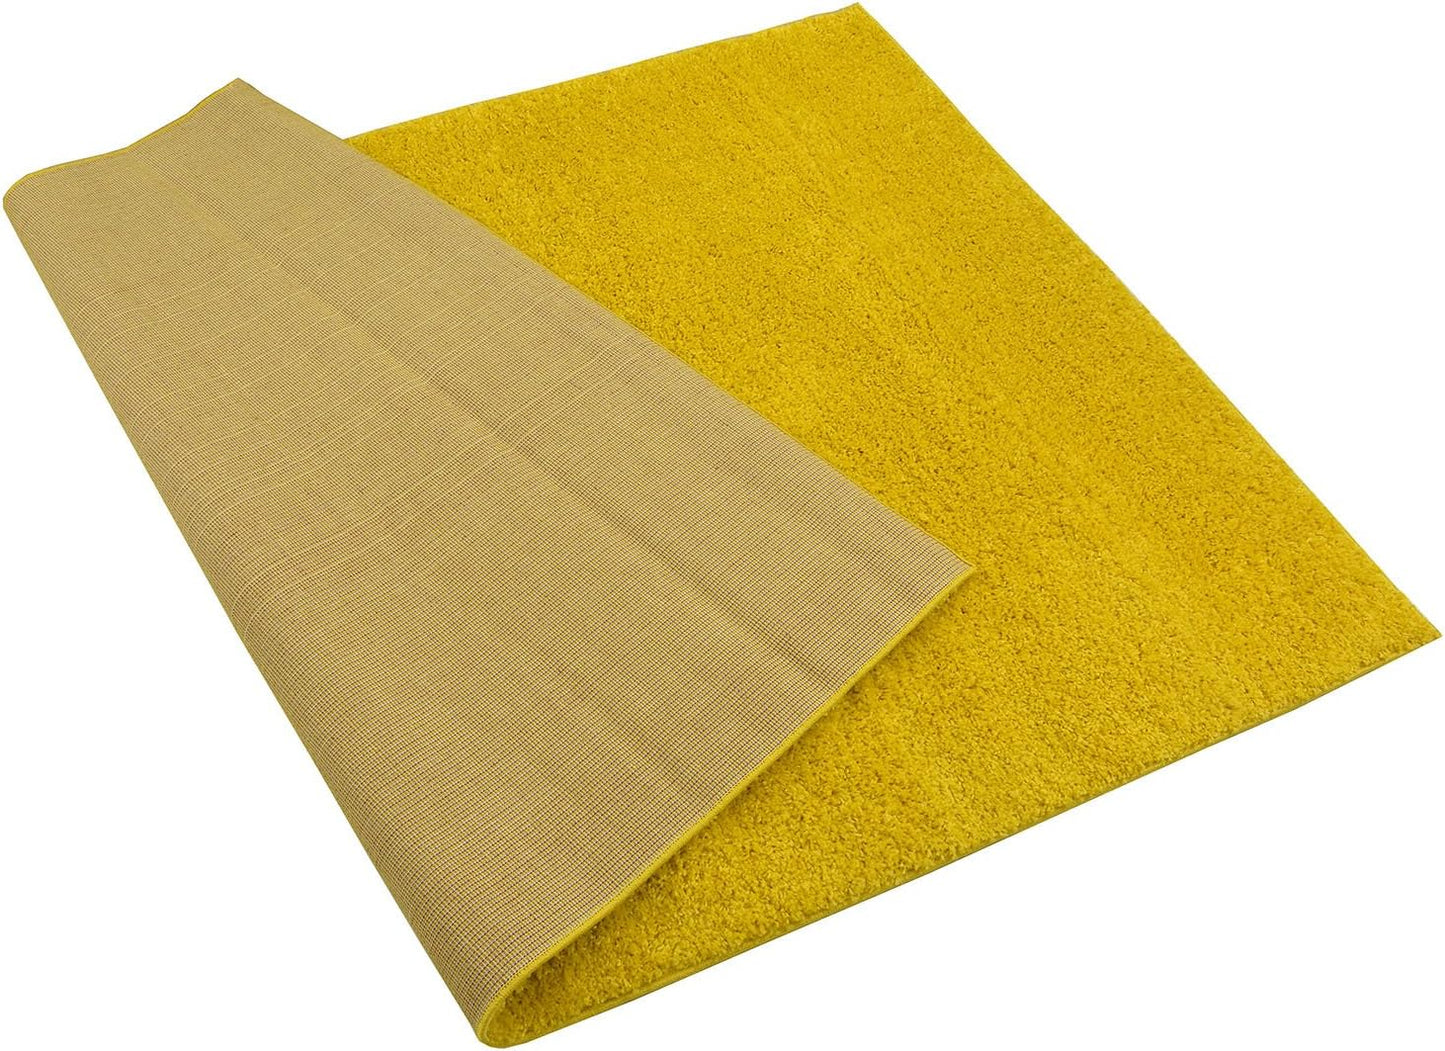 SOHO Shaggy Collection Solid Color Shag Area Rug (Yellow, 8 x 10)